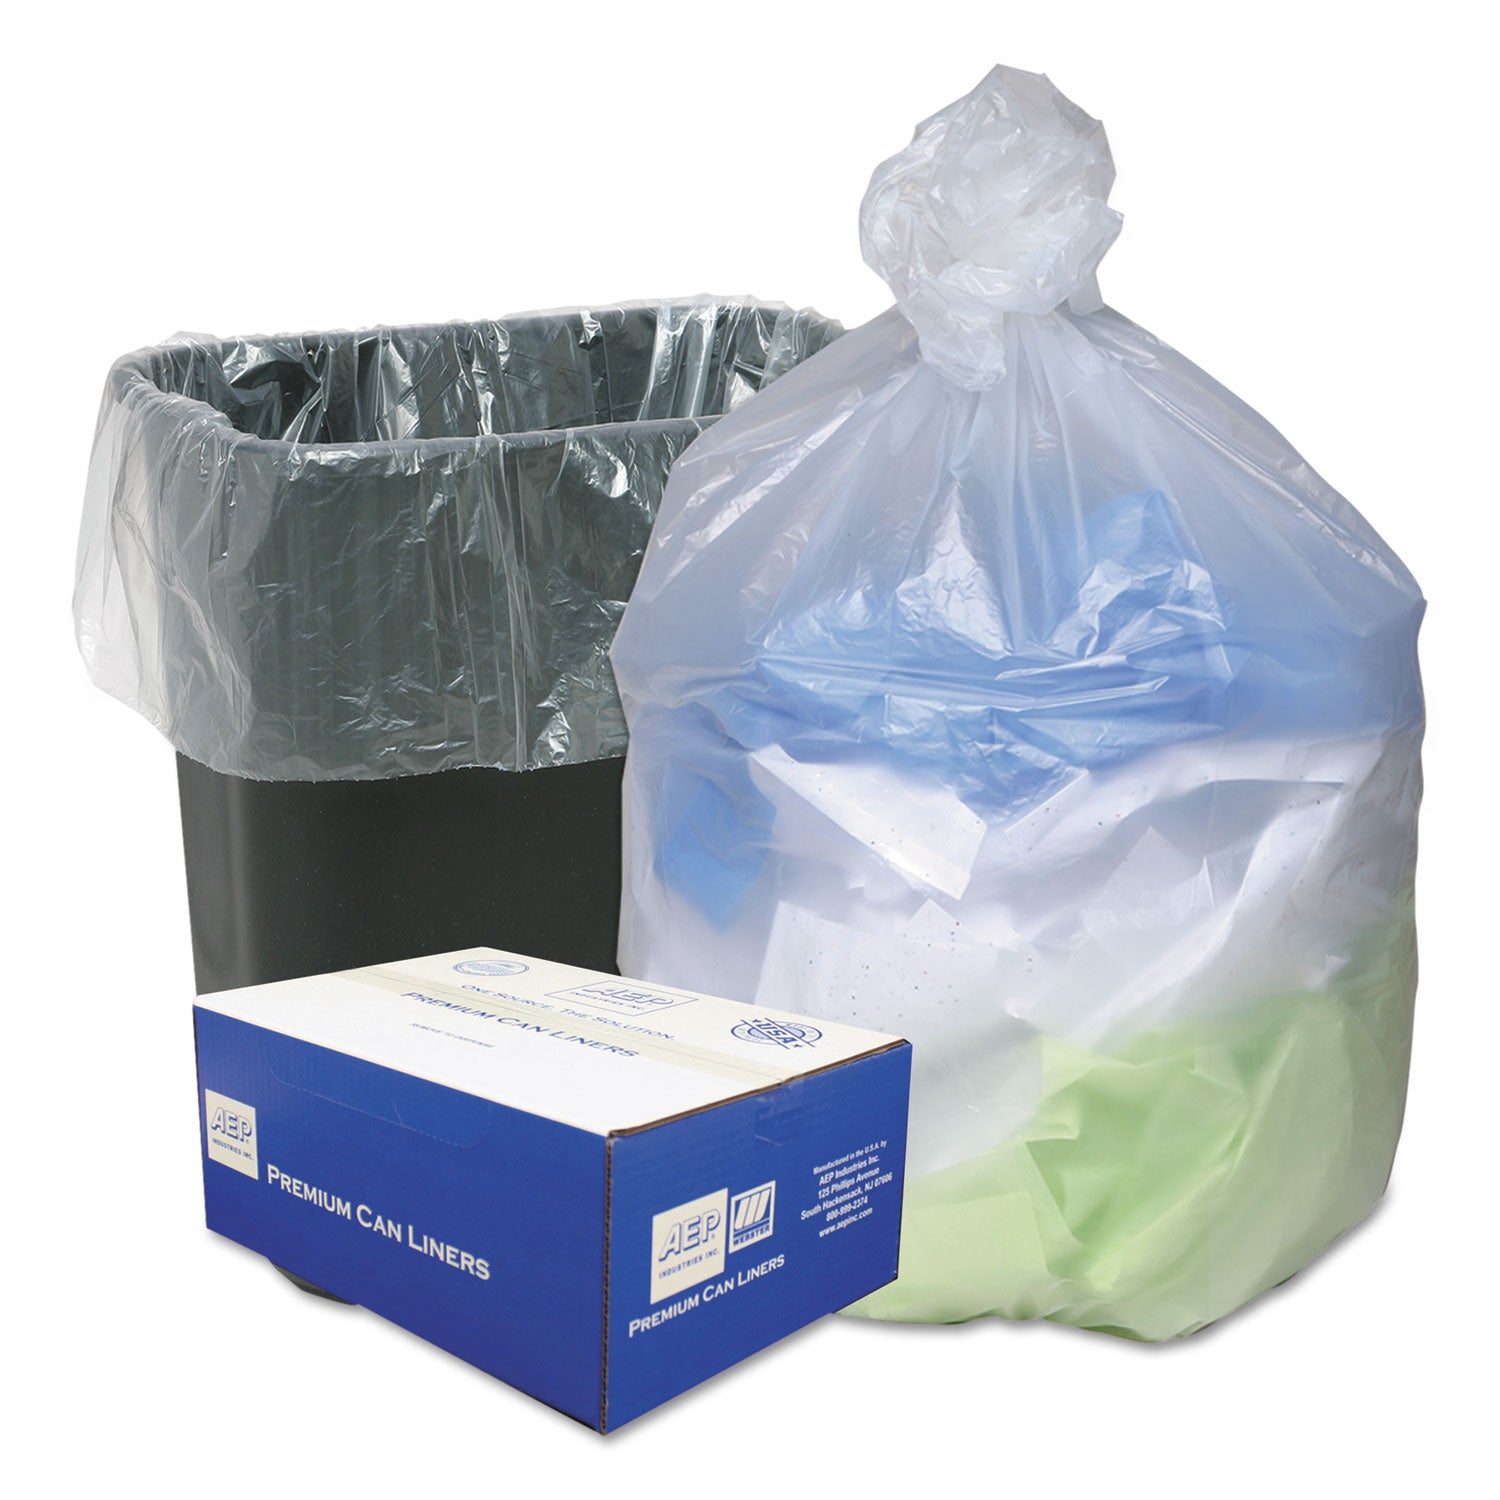 can-liners-16-gal-8-mic-24-x-33-natural-50-bags-roll-4-rolls-carton_wbiwhd2431 - 1